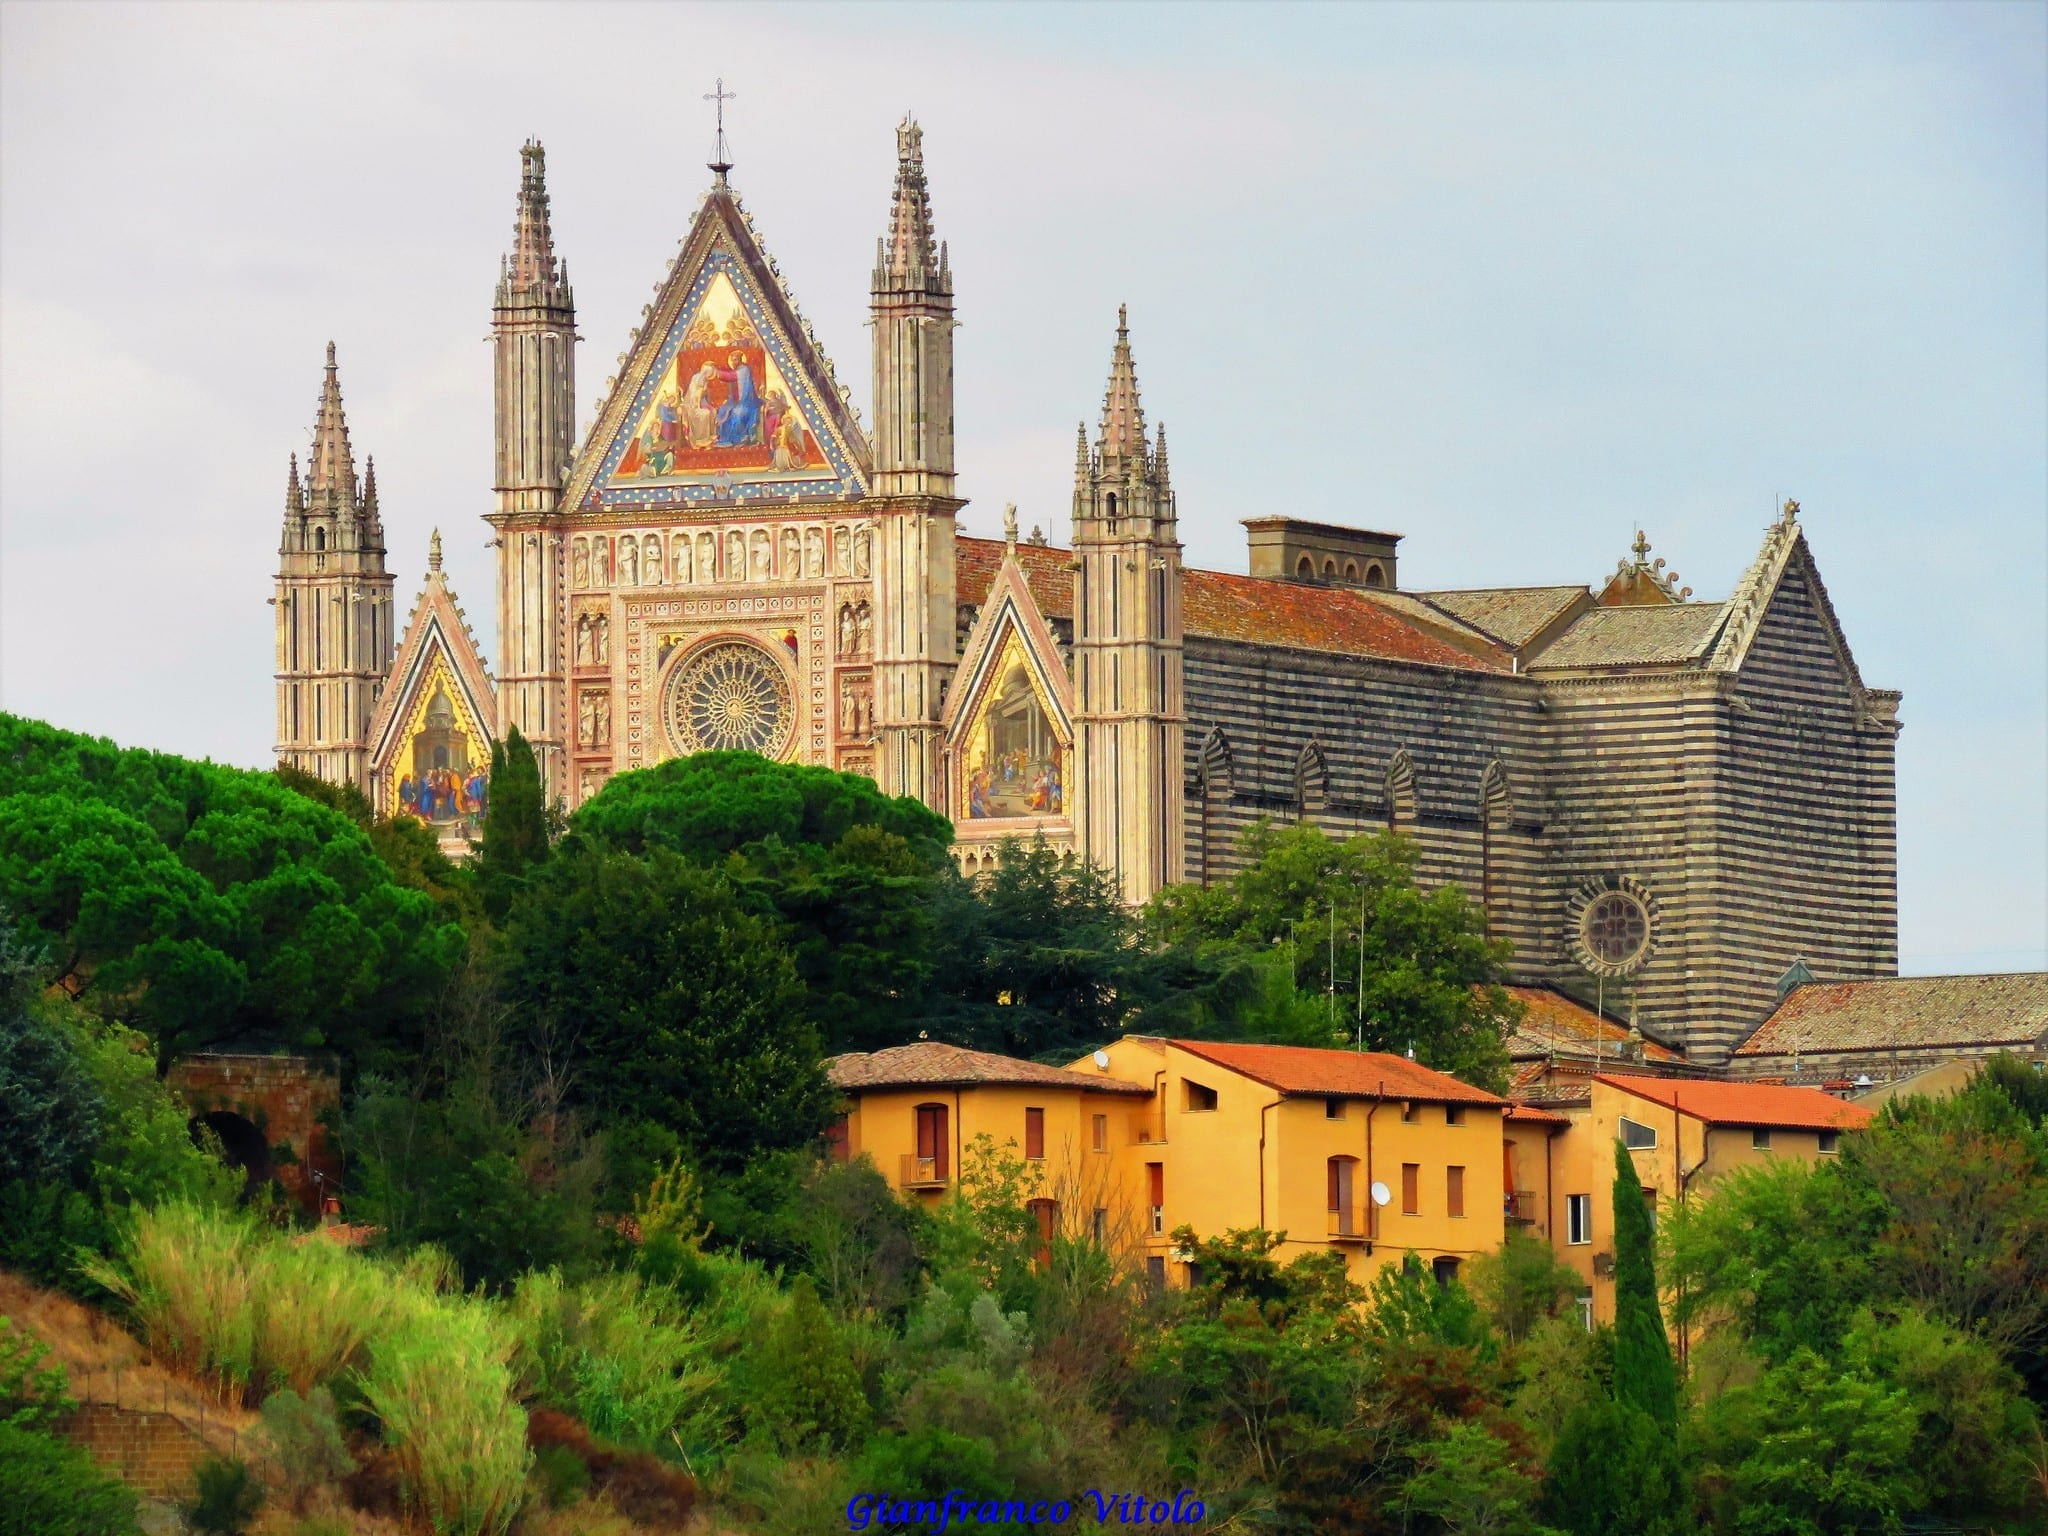 Partial front view of the Duomo di Orvieto with brightly painted scenes